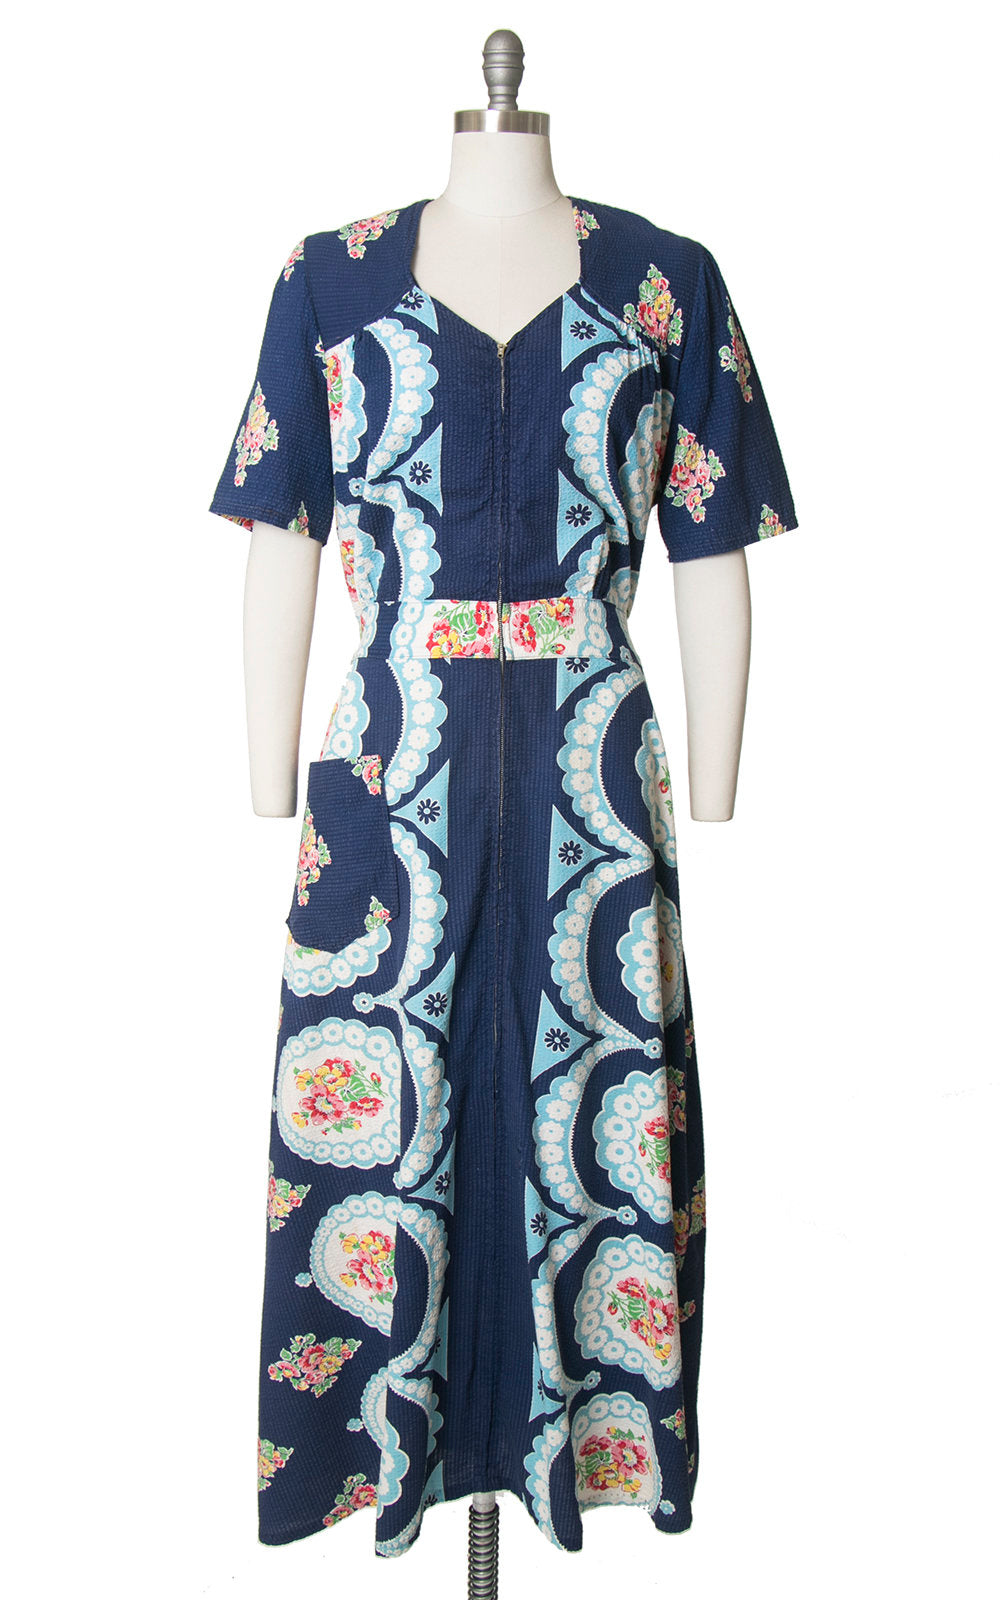 Vintage 1940s Dress | 40s Floral Cotton Dressing Gown Navy Blue Maxi Day House Dress (large/x-large)